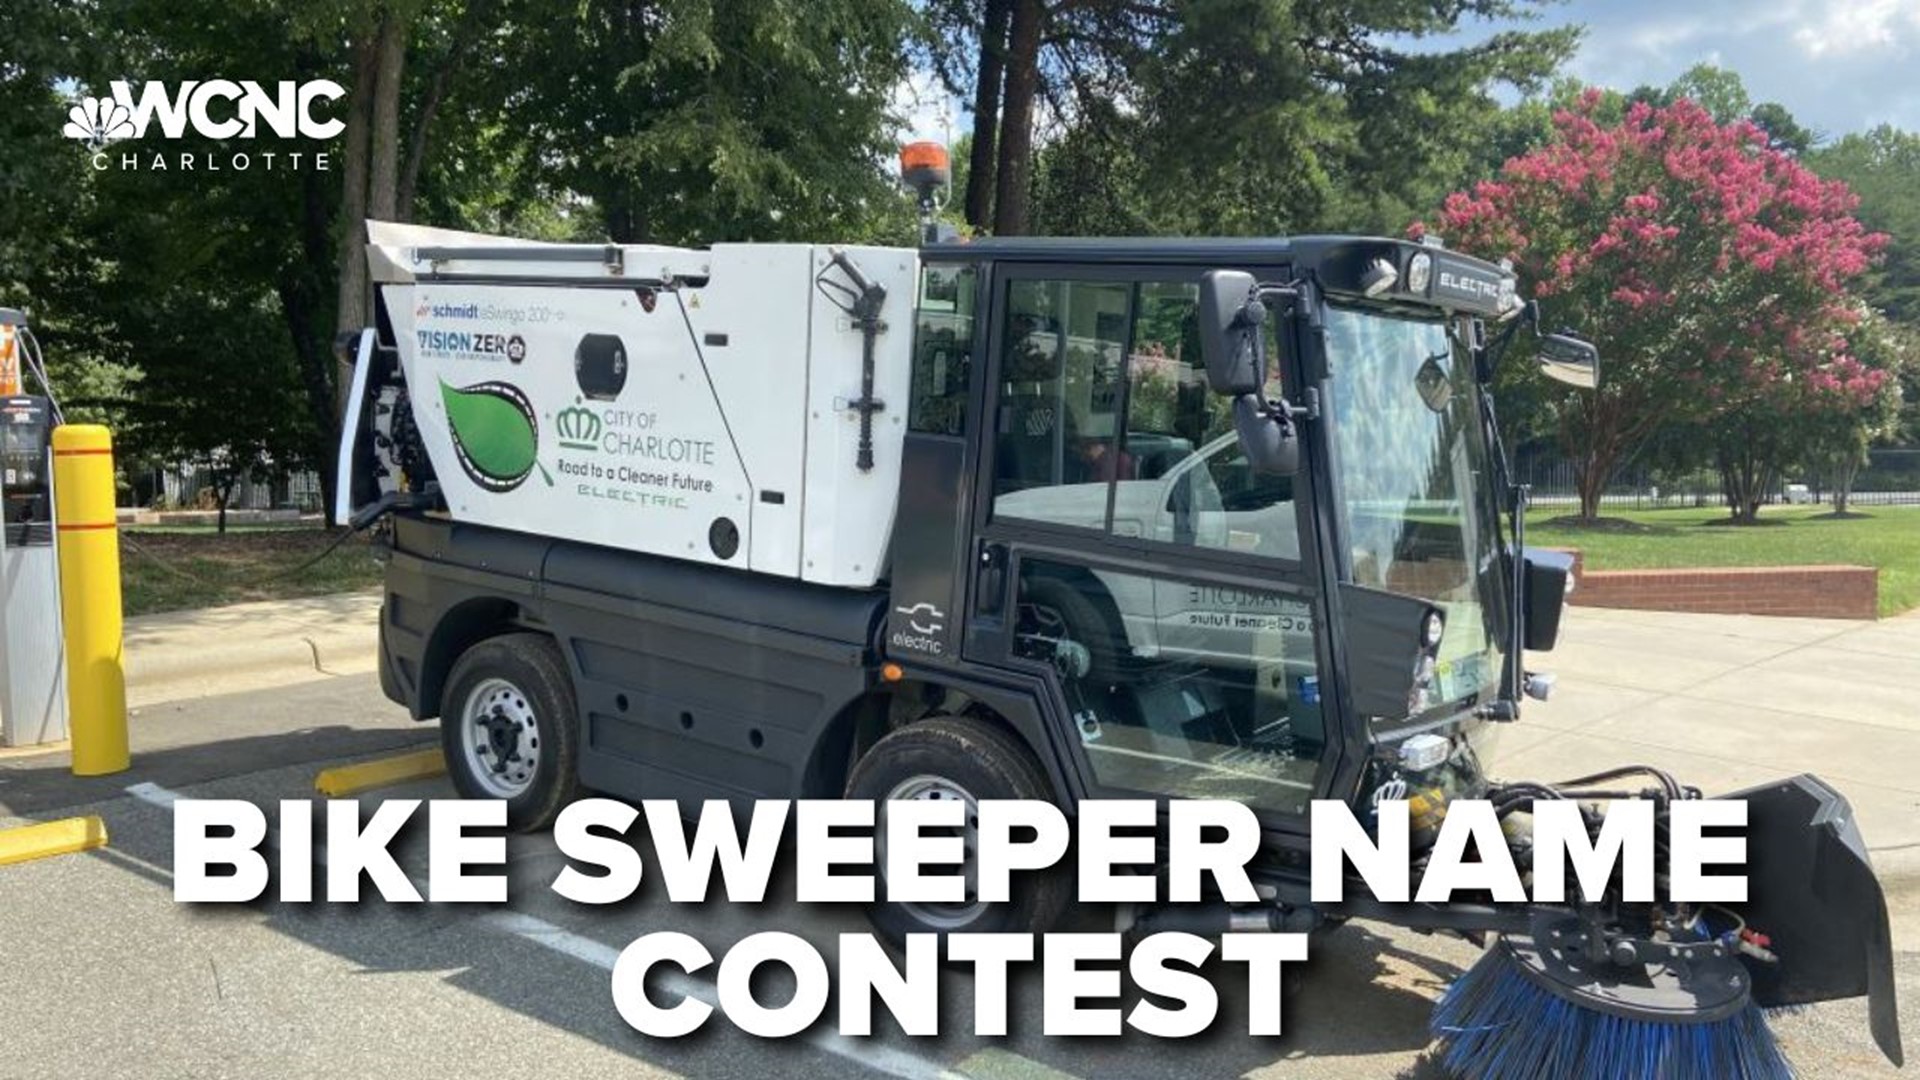 The City is asking for public input to help name the new bike lane sweeper machine.